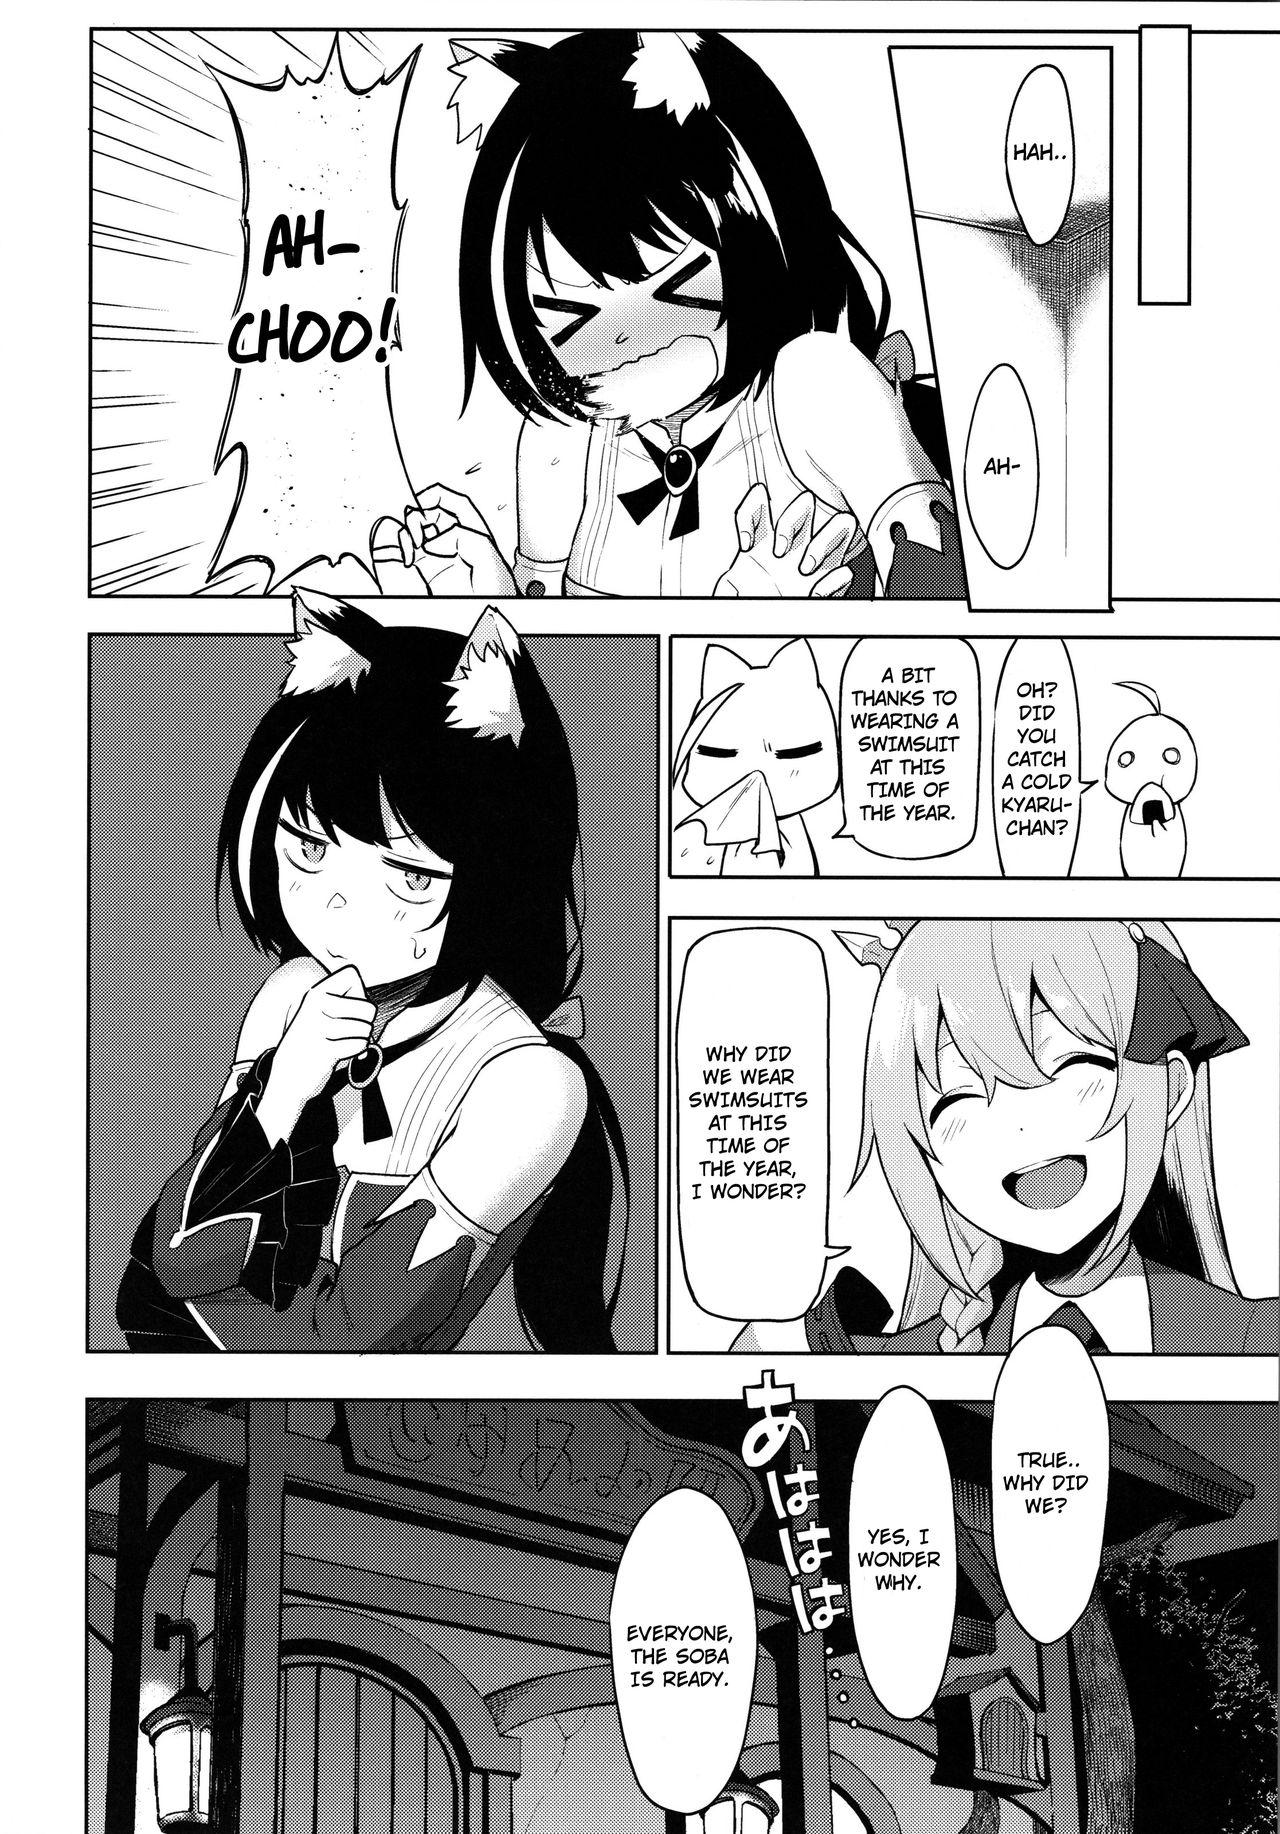 Girlfriends Princess to Connect Shitai! ReDive! | I want to connect with a princess! ReDive! - Princess connect Mofos - Page 25